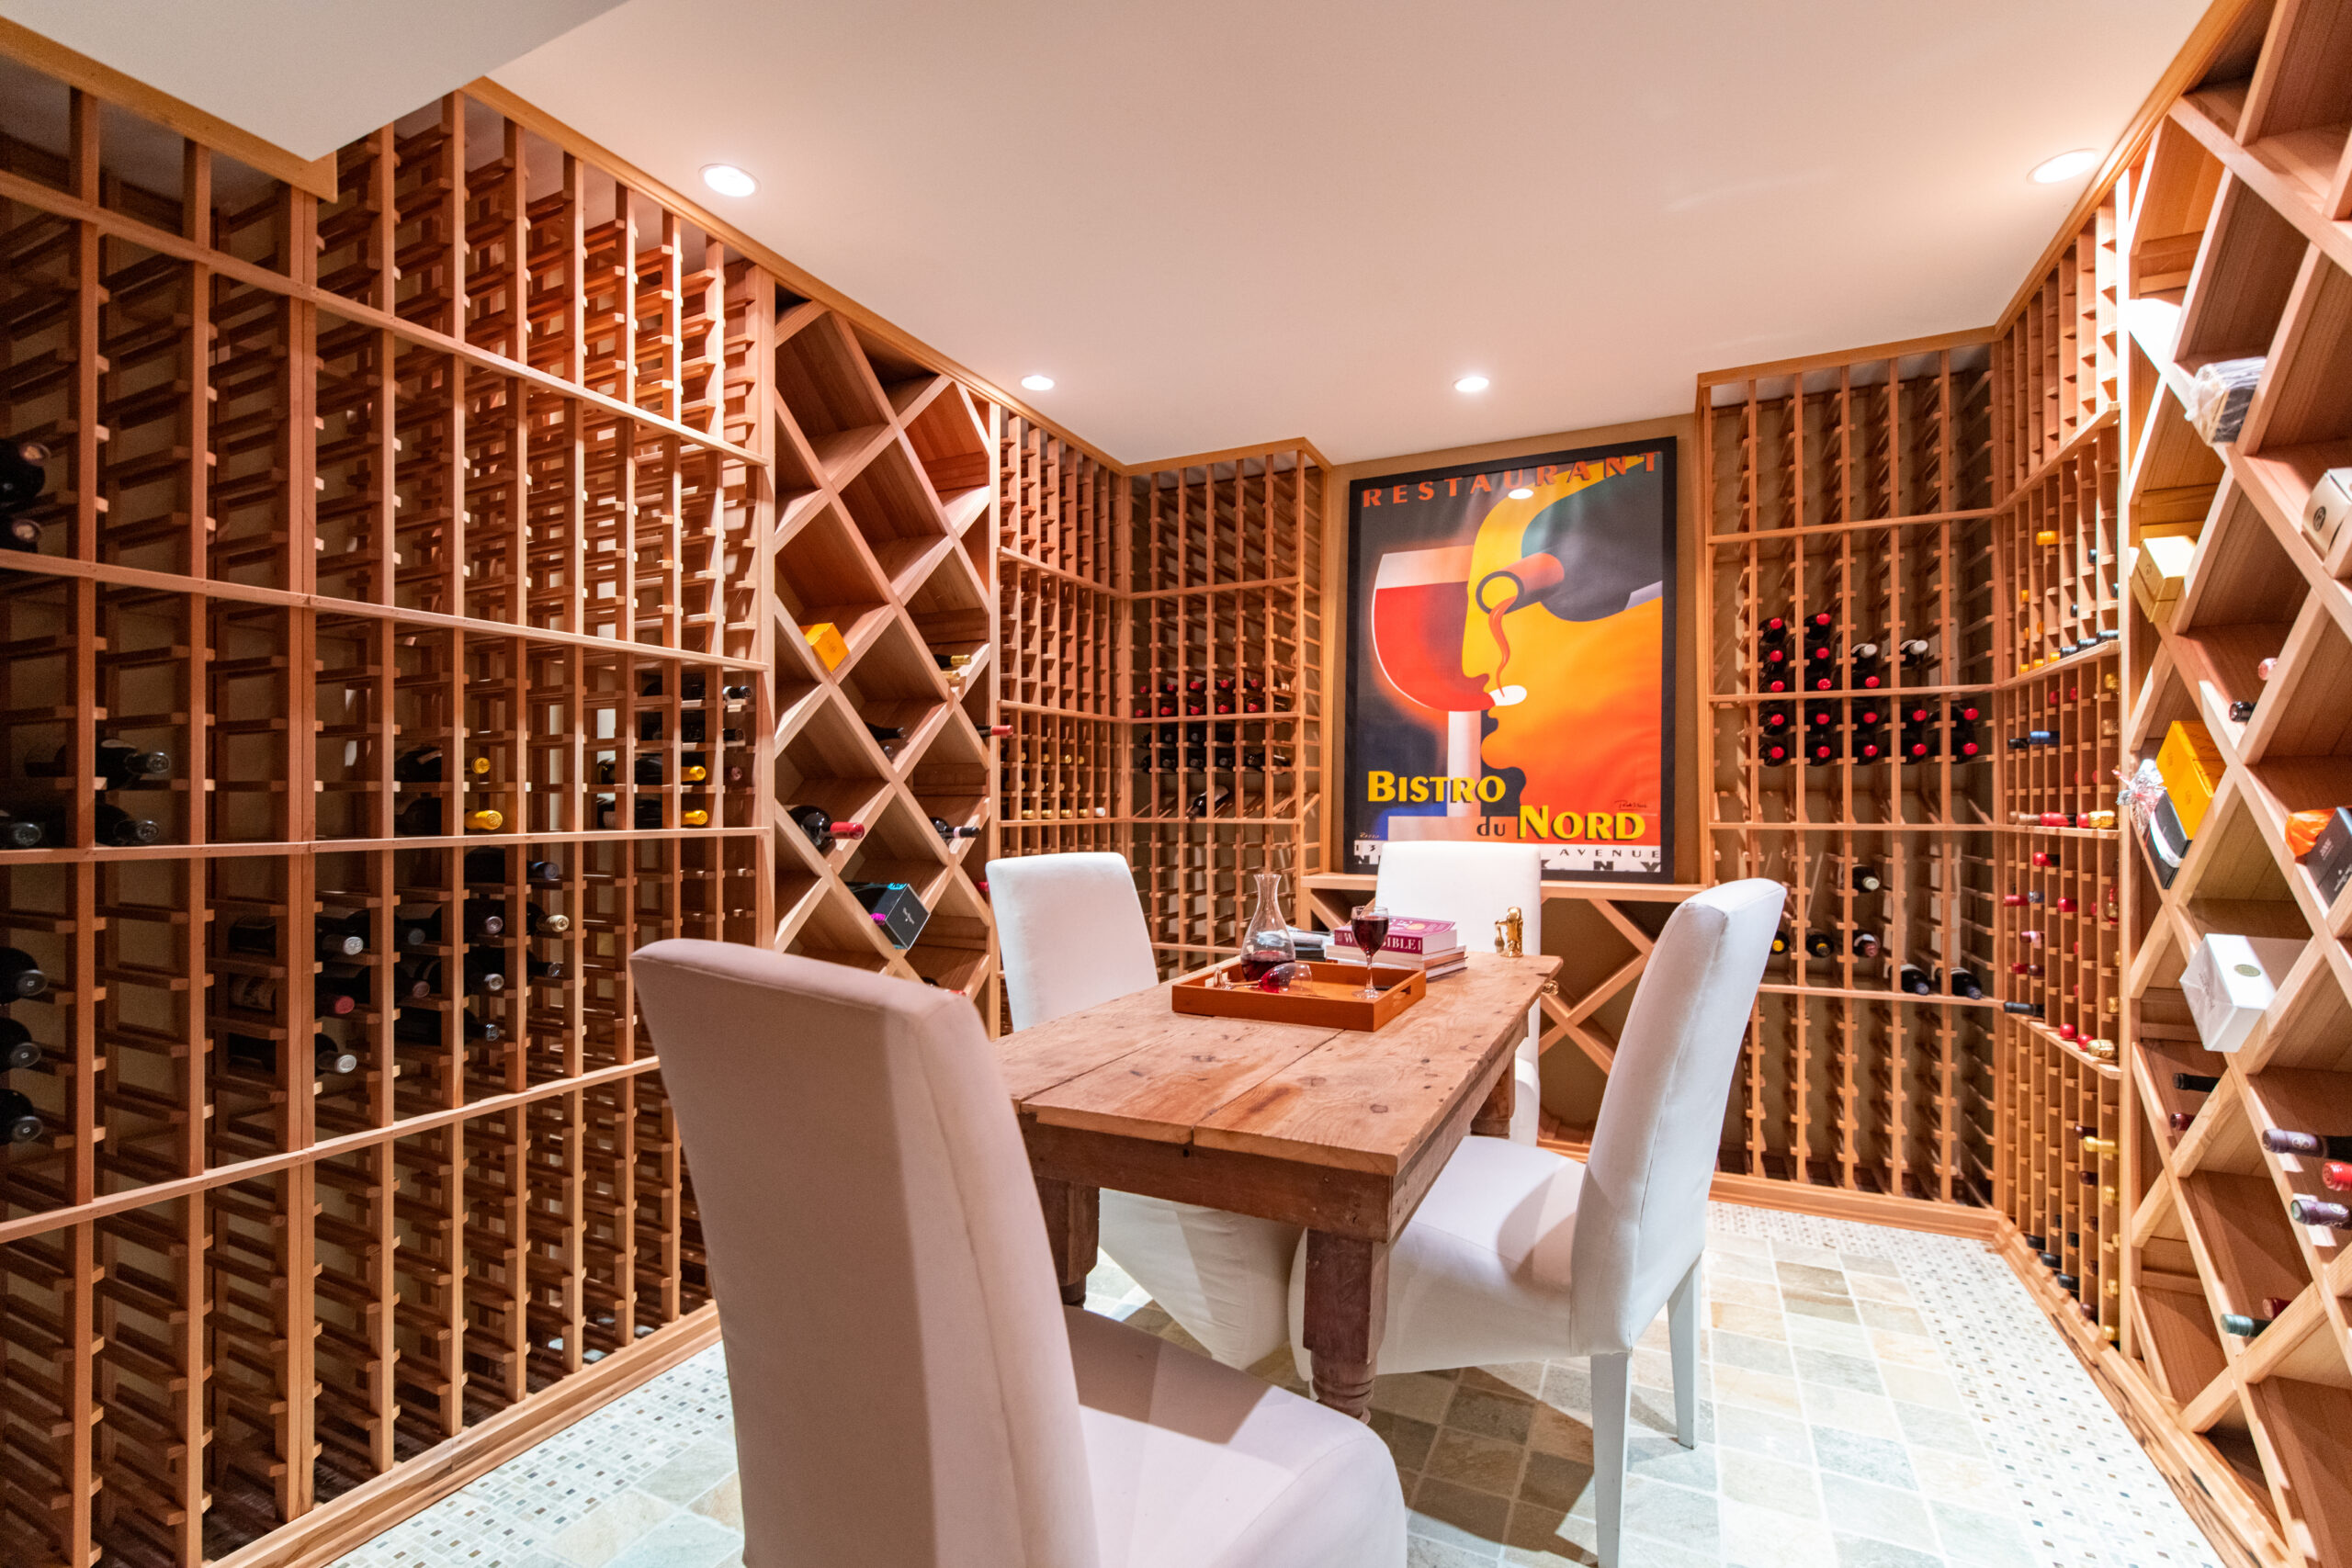 The wine tasting room at 25 Shaw Road is outfitted with a special air filtration system for enjoying cigars.  COURTESY THE CORCORAN GROUP